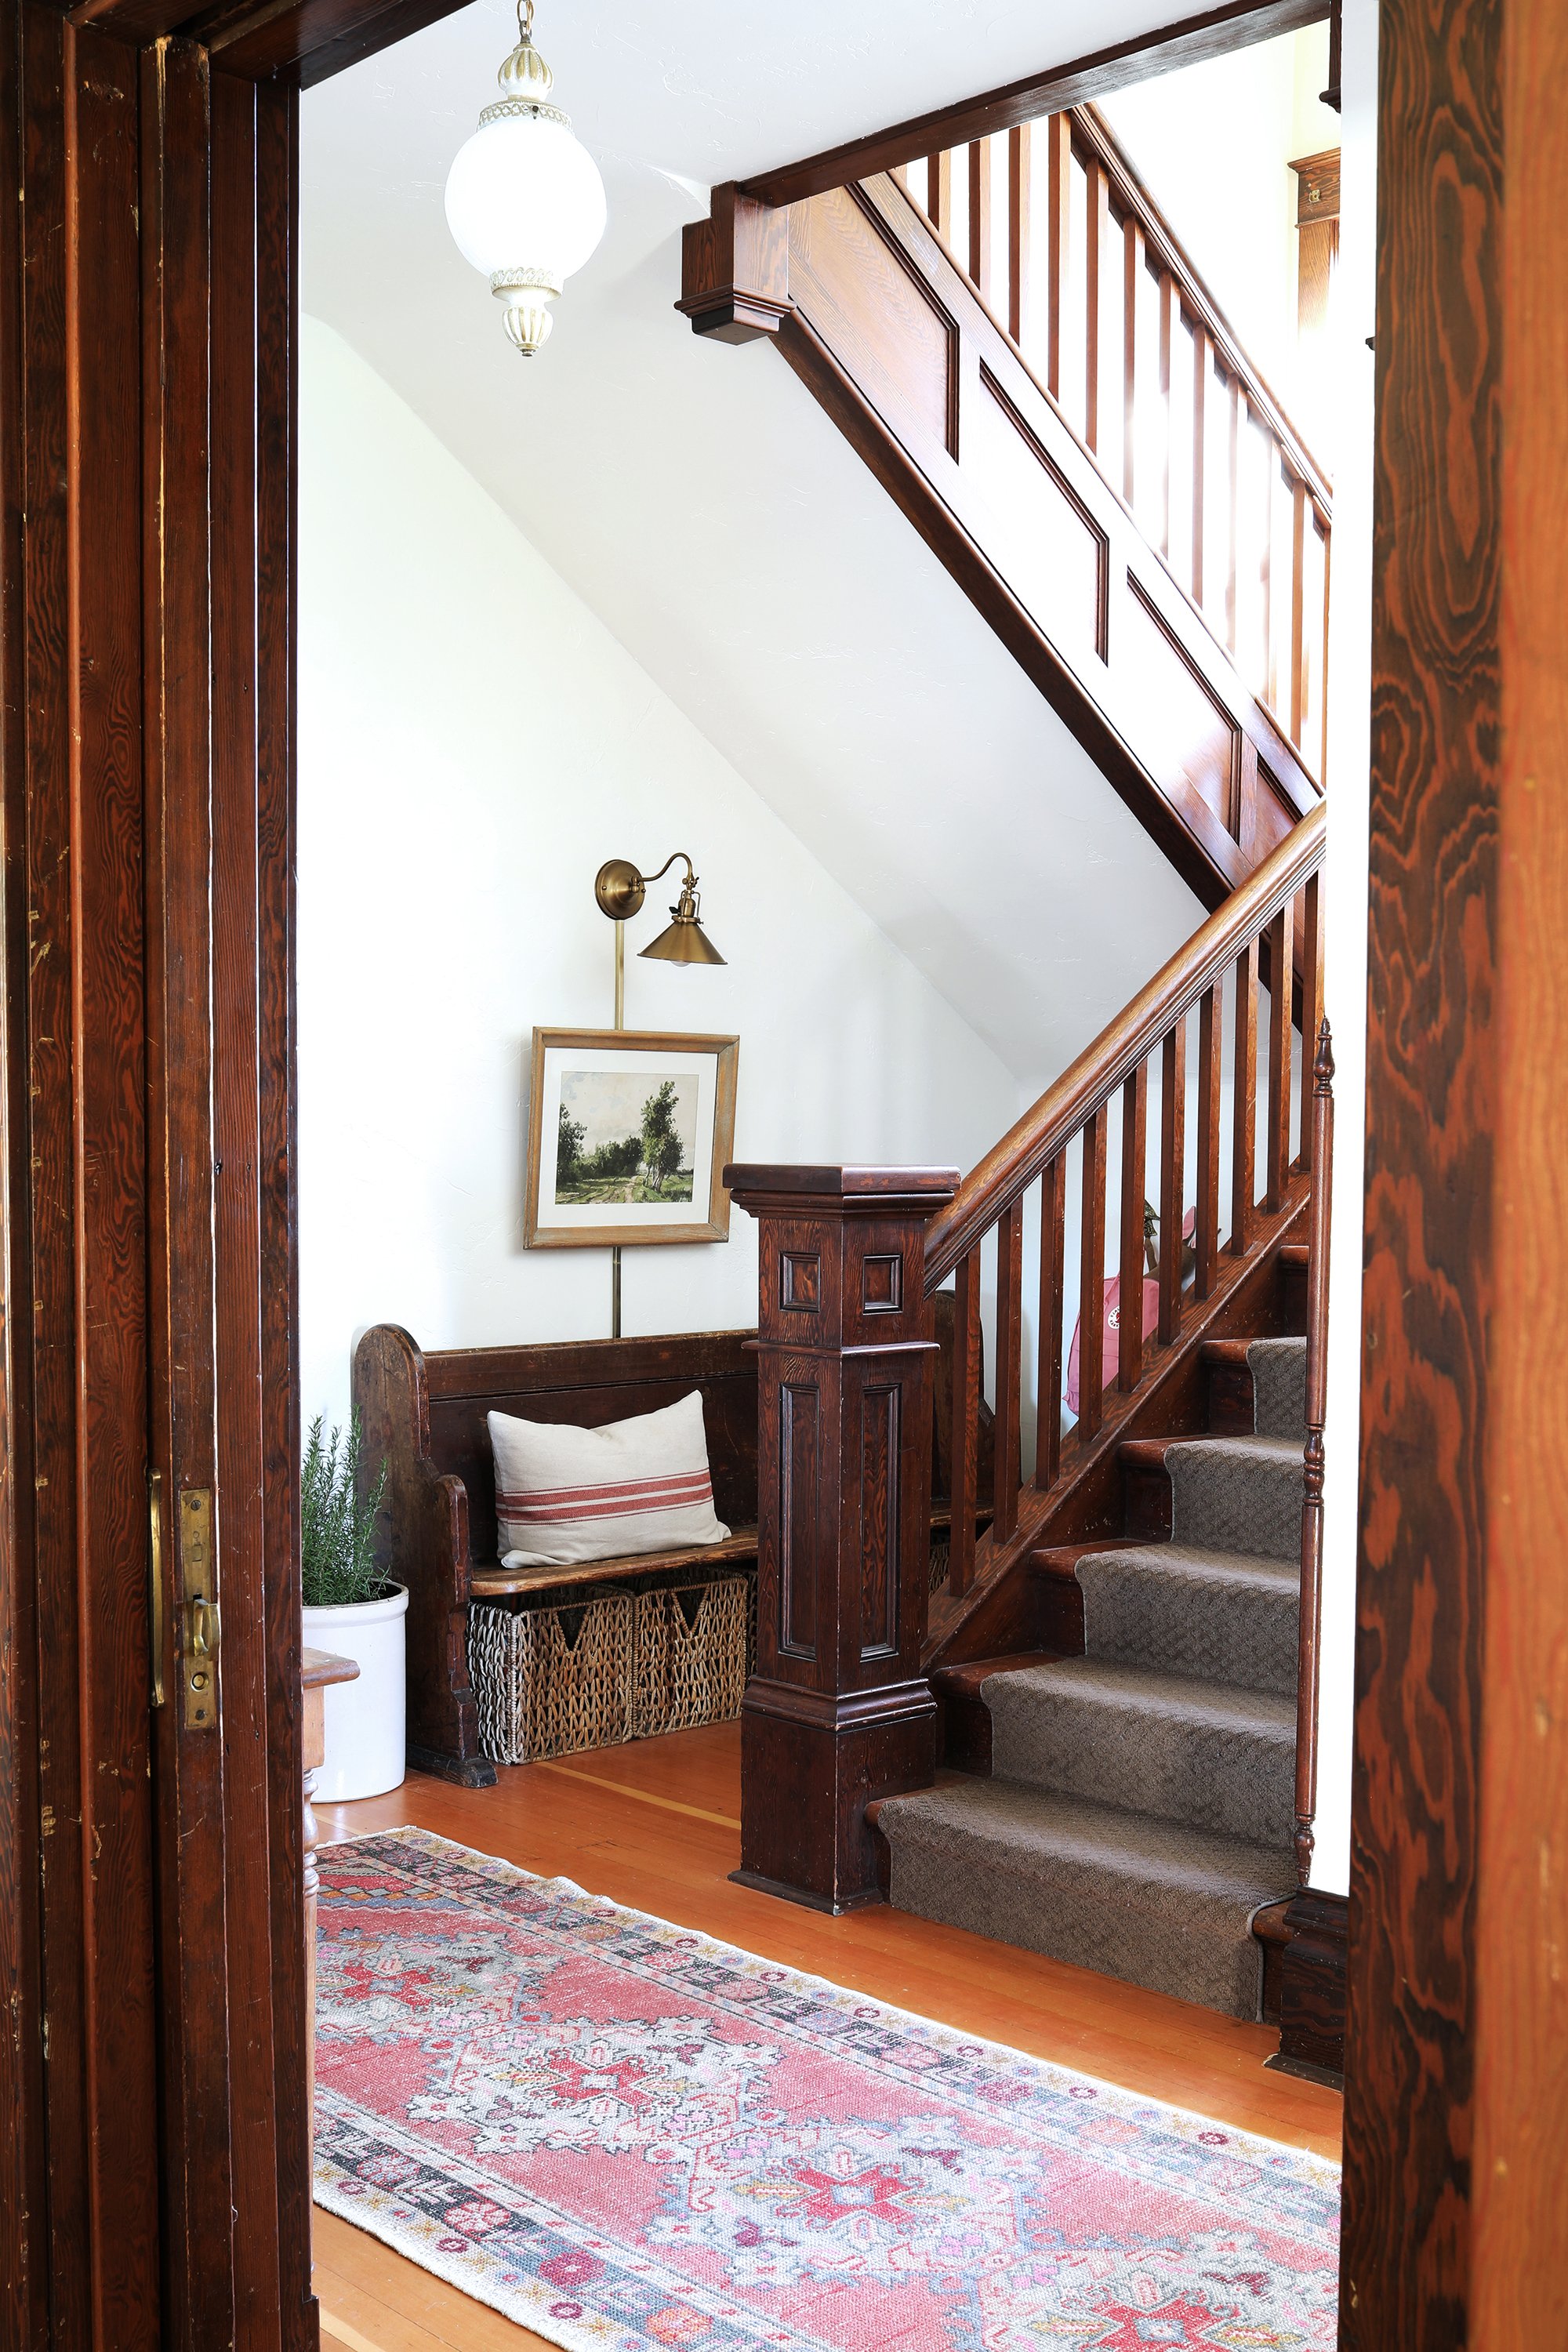 Should I paint my wood trim? — The Grit and Polish